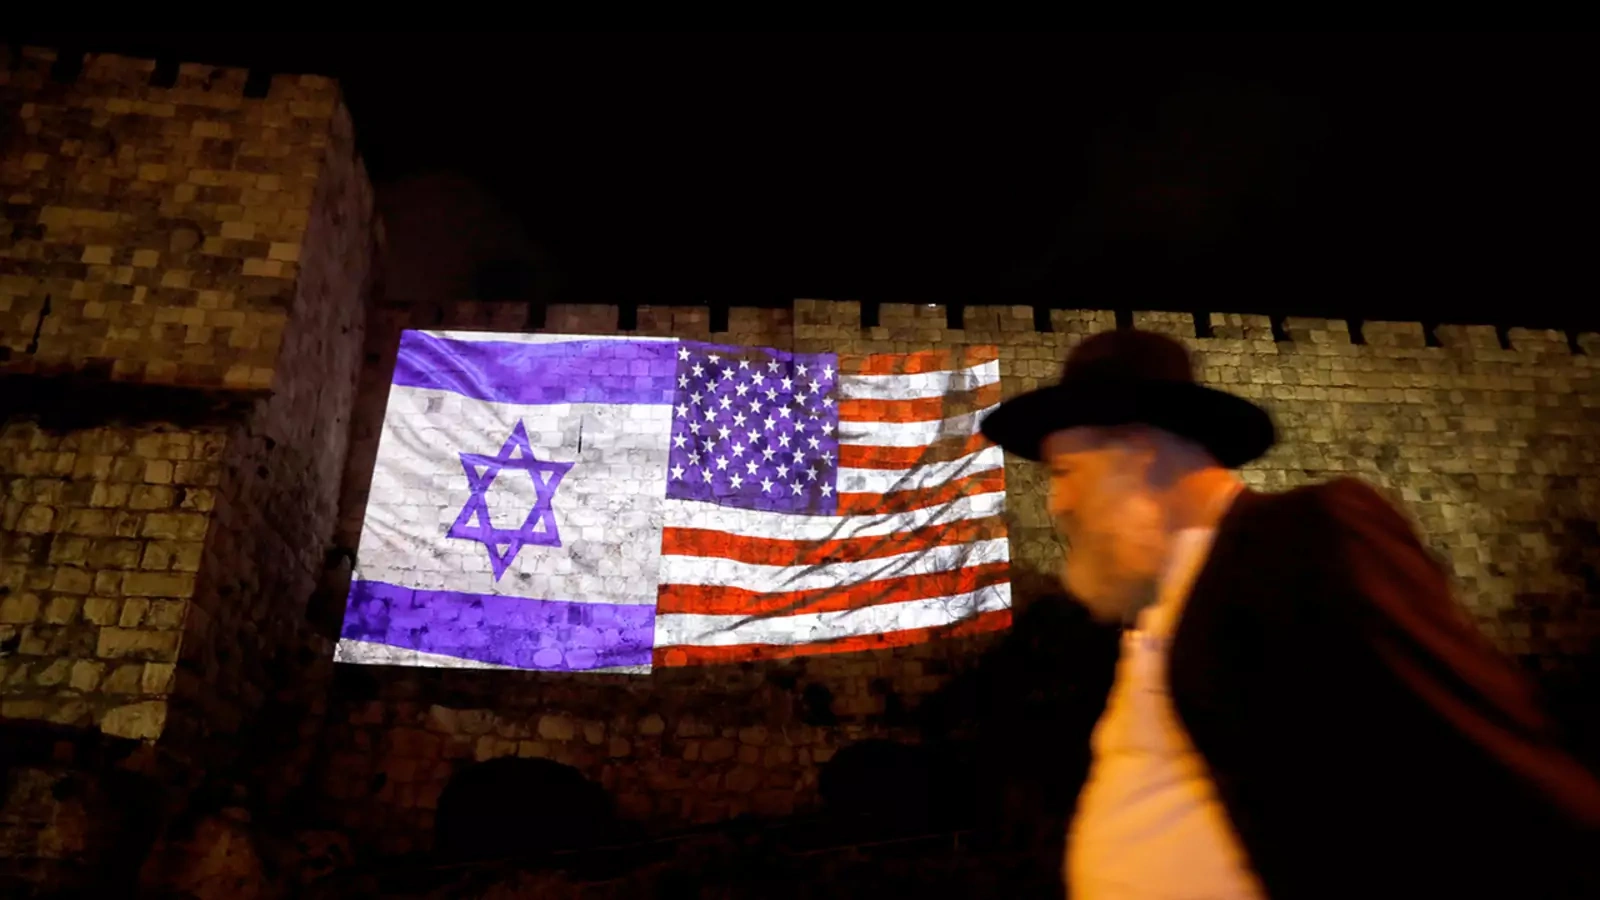 The Israeli and American flags are projected on the walls surrounding Jerusalem’s Old City.